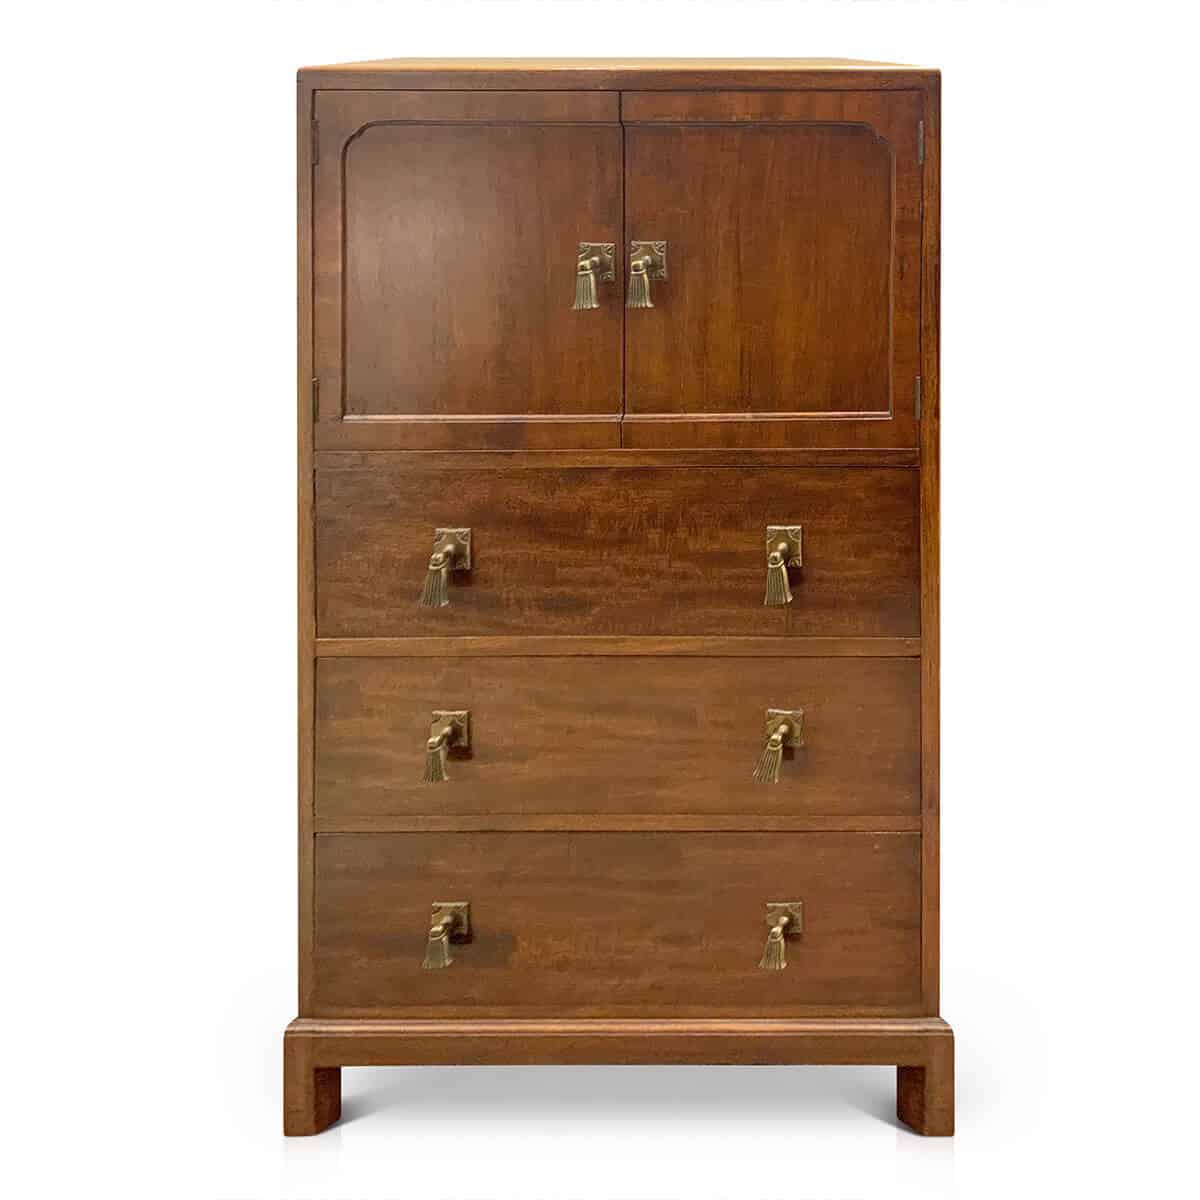 Arts and Crafts Movement chest of drawers with straight grain walnut veneers